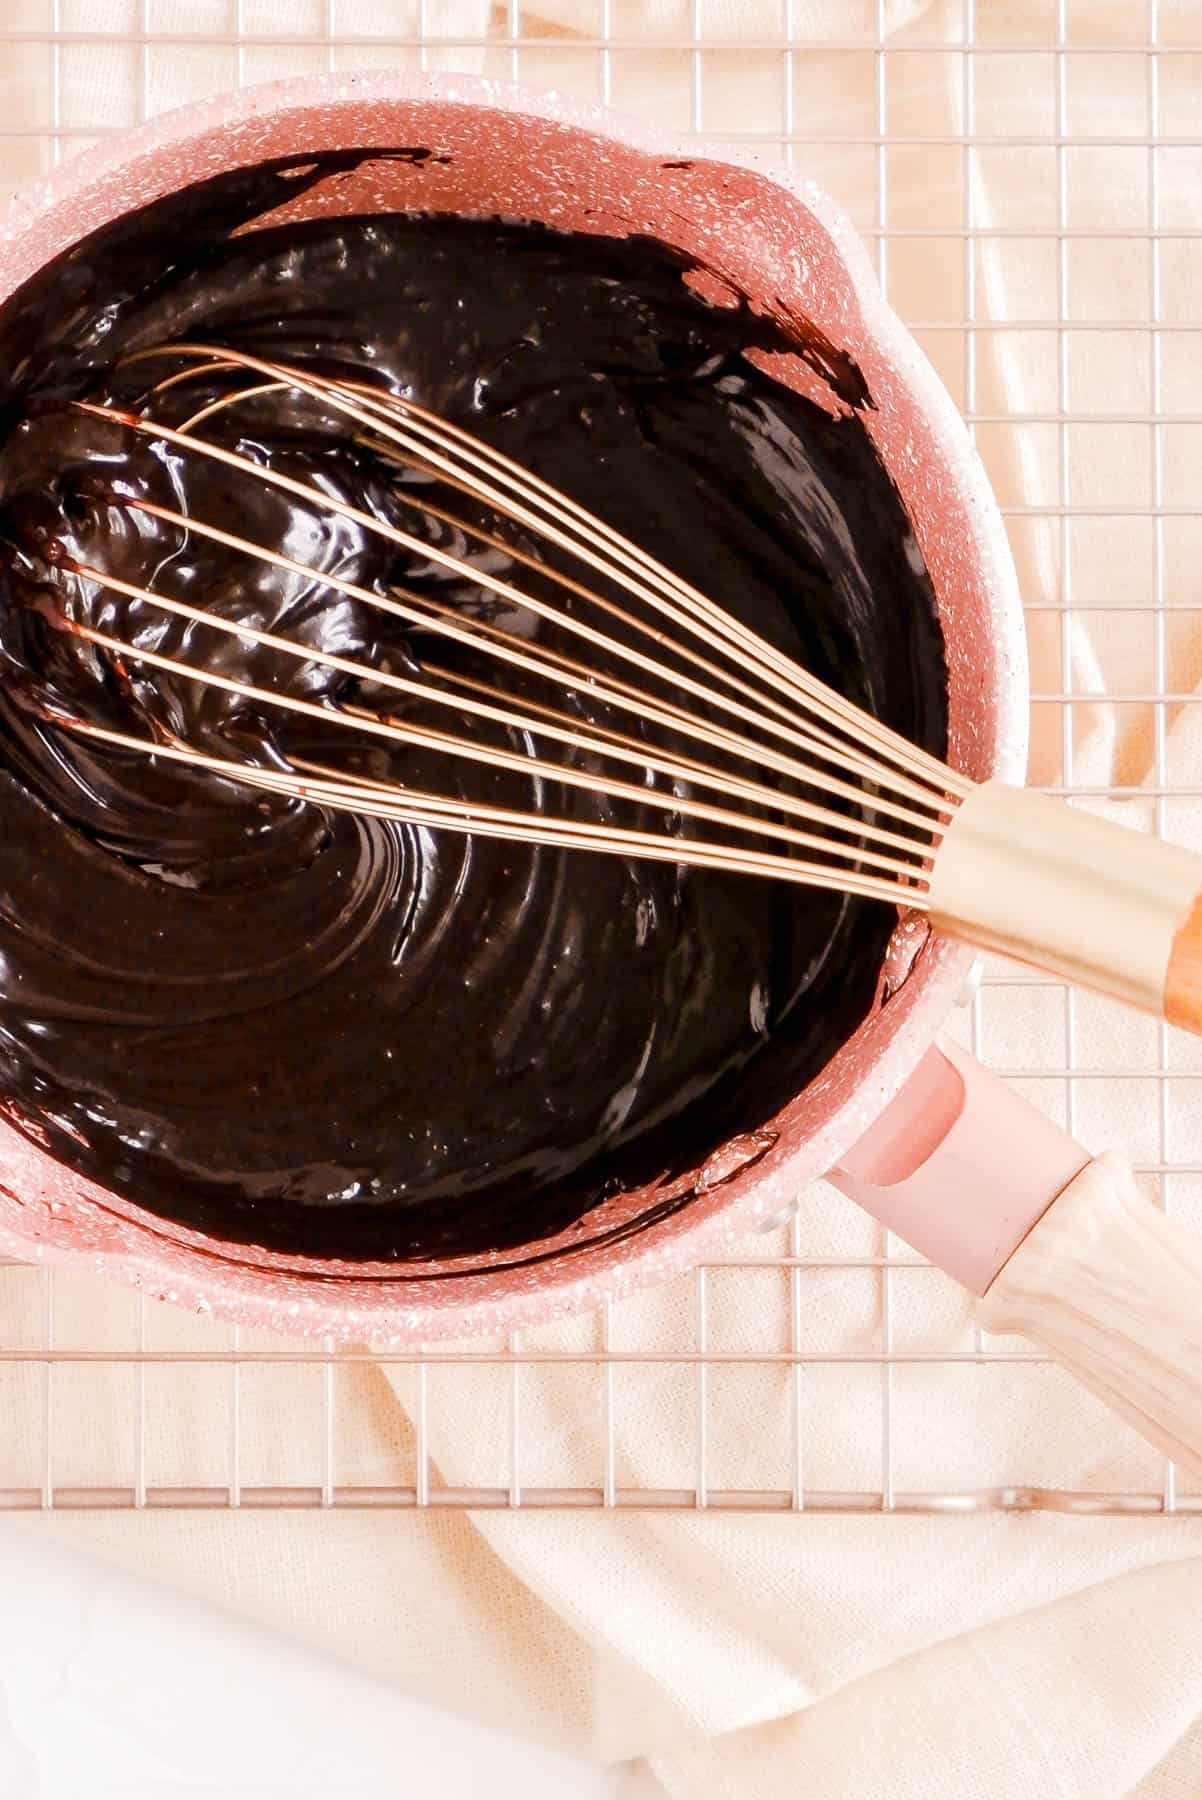 all the hot fudge sauce ingredients in a pot with a gold whisk fully cooked and thickened.